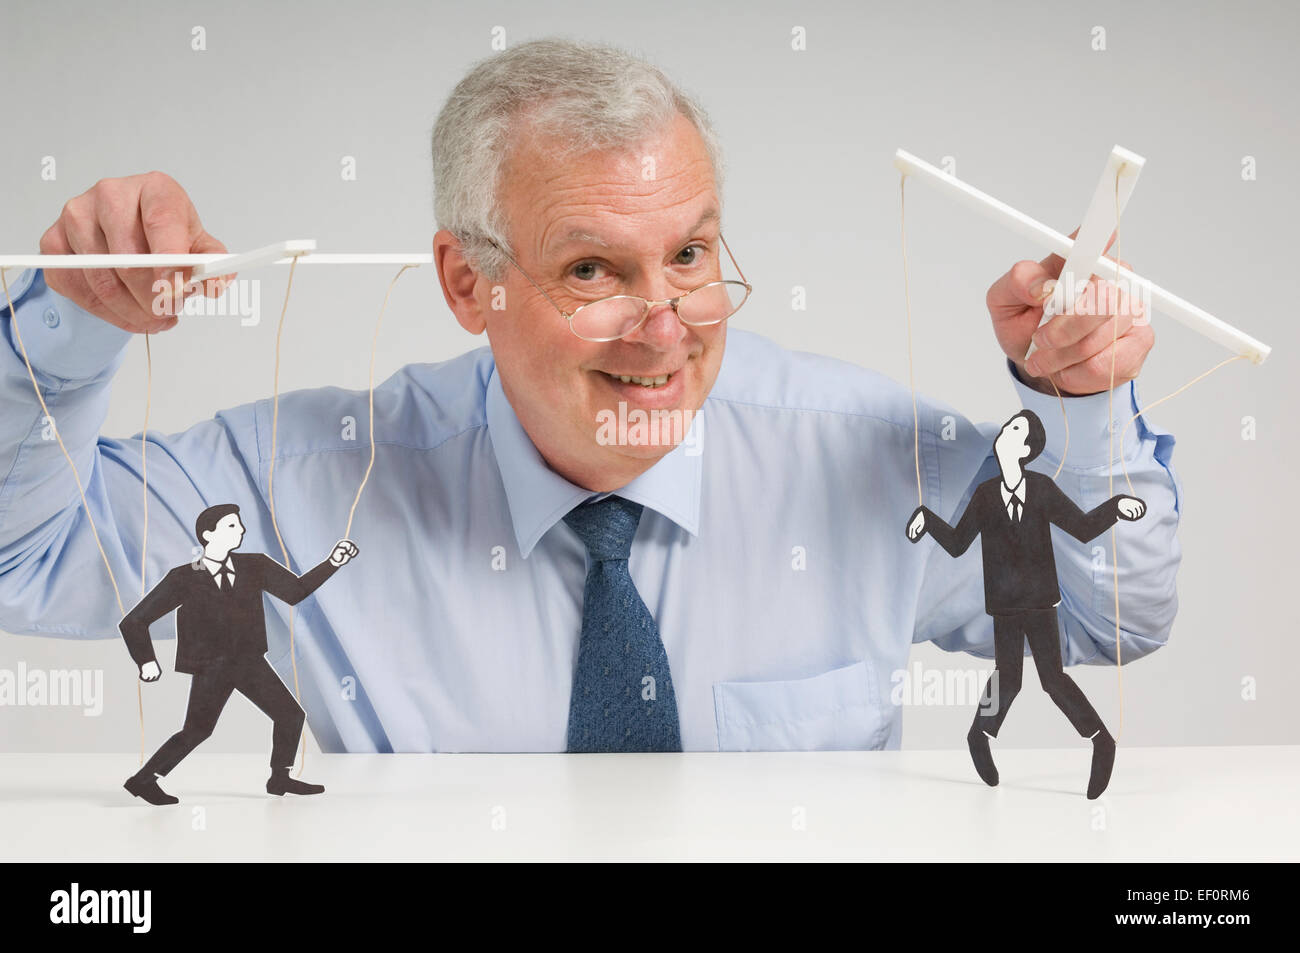 Man playing with puppets Stock Photo